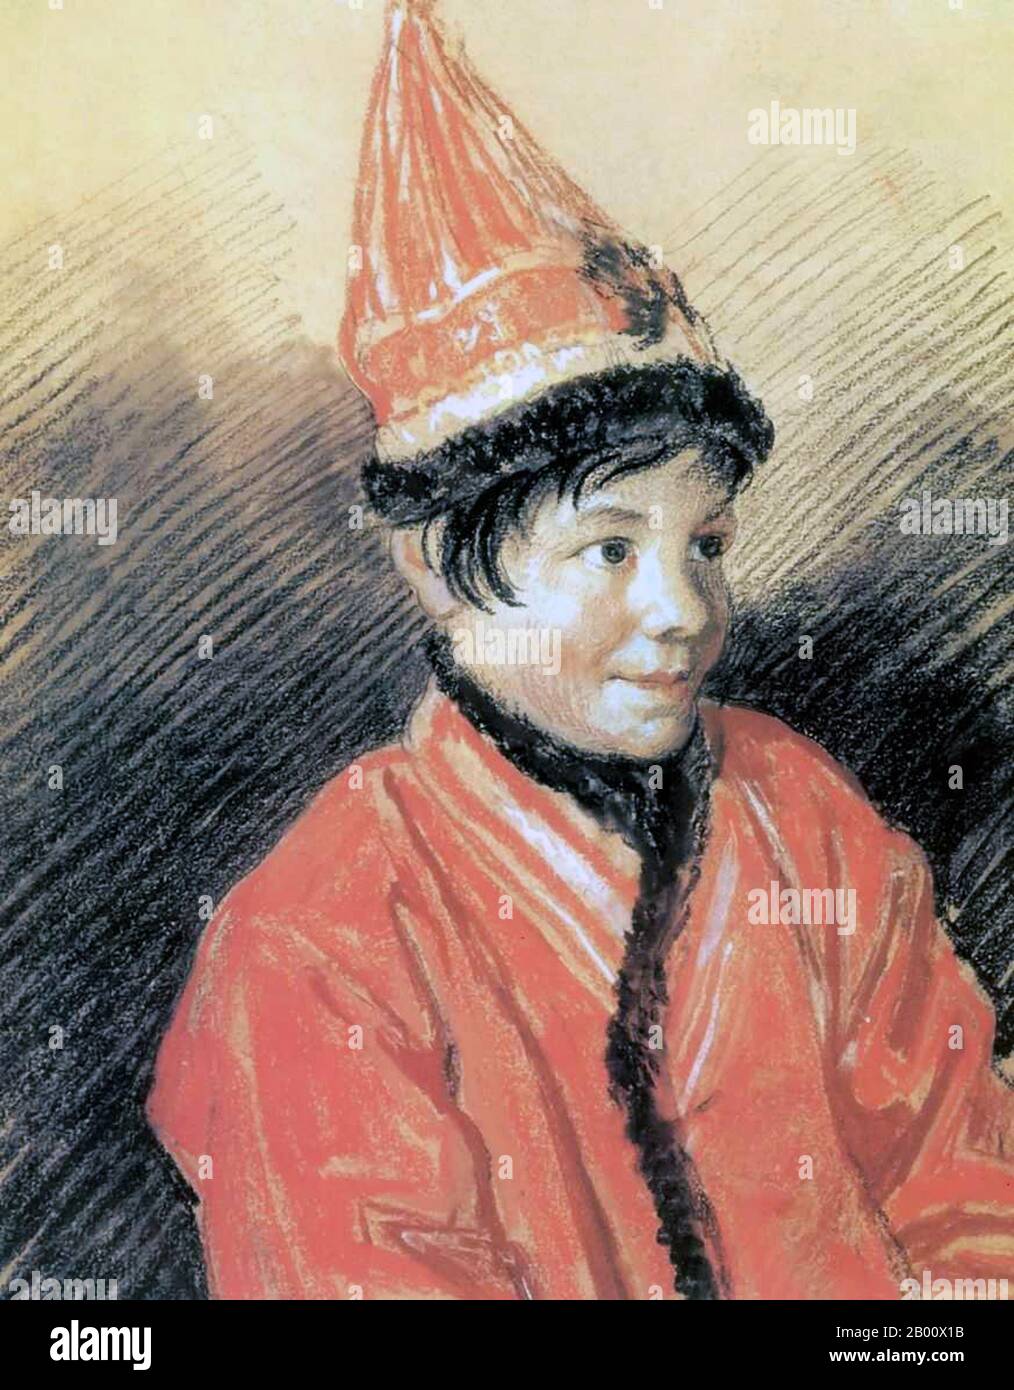 Russia: Portrait of a Kalmyk Woman, Orest Kiprensky (1782-1836), 1813.  Kalmyk people or Kalmyks (alternatively translated as 'Kalmuck,' 'Kalmuk,' or 'Kalmyki') is the name given to western Mongolic people - Oirats, whose descendants migrated from western China in the seventeenth century. Today they form a majority in the autonomous Republic of Kalmykia on the western shore of the Caspian Sea. Through emigration, small Kalmyk communities have been established in the United States, France, Germany, Switzerland, and the Czech Republic. Stock Photo